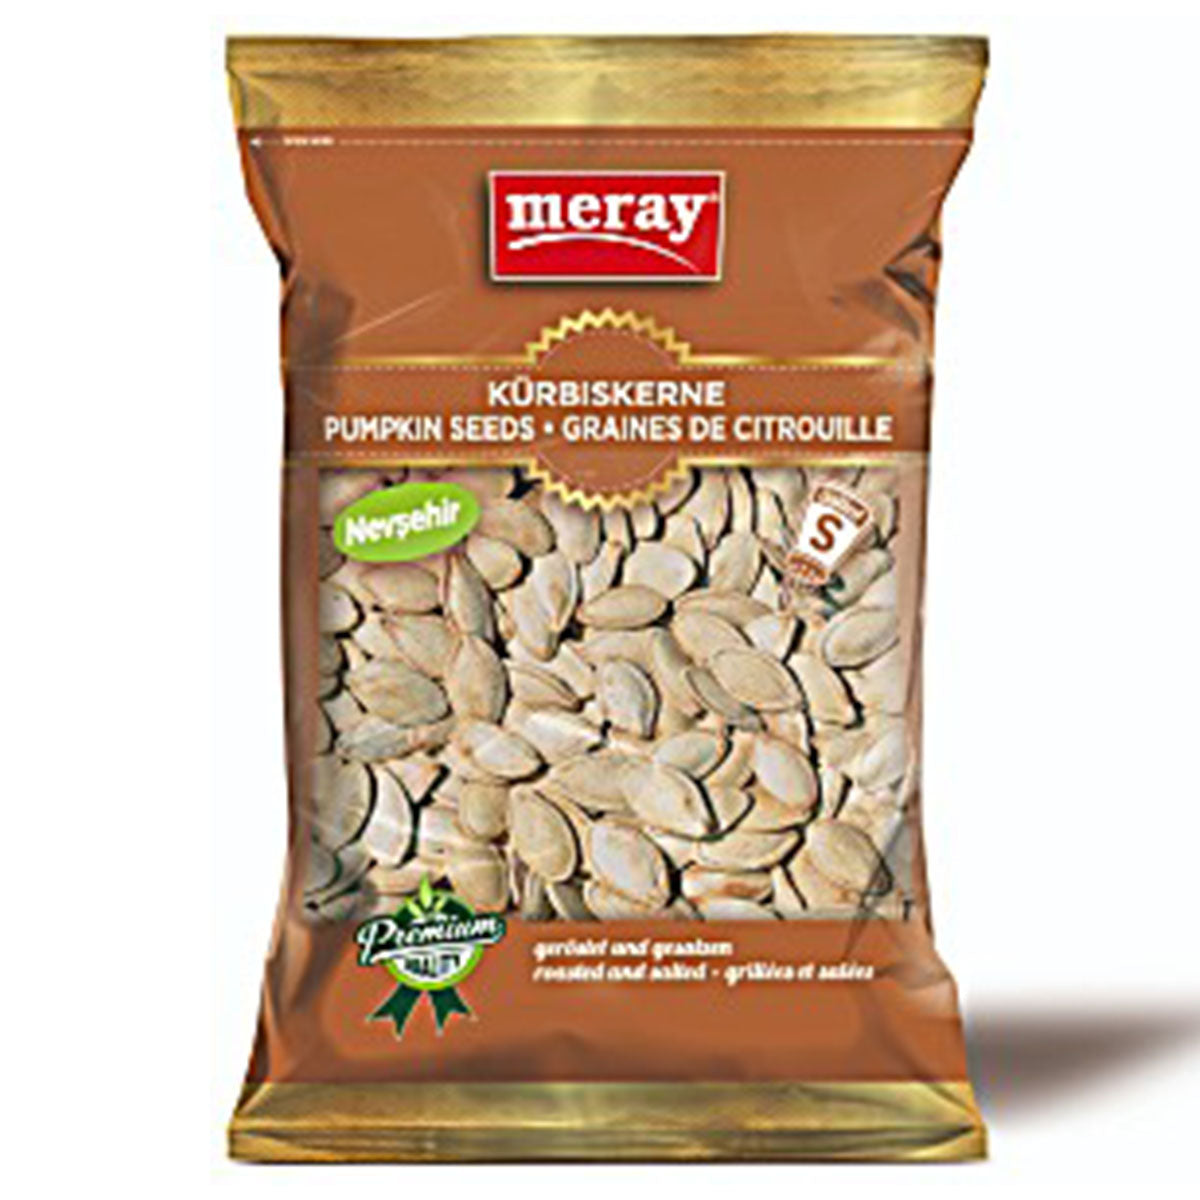 Meray - Pumpkin Seeds Nevsehir Roasted And Salted - 200g - Continental Food Store